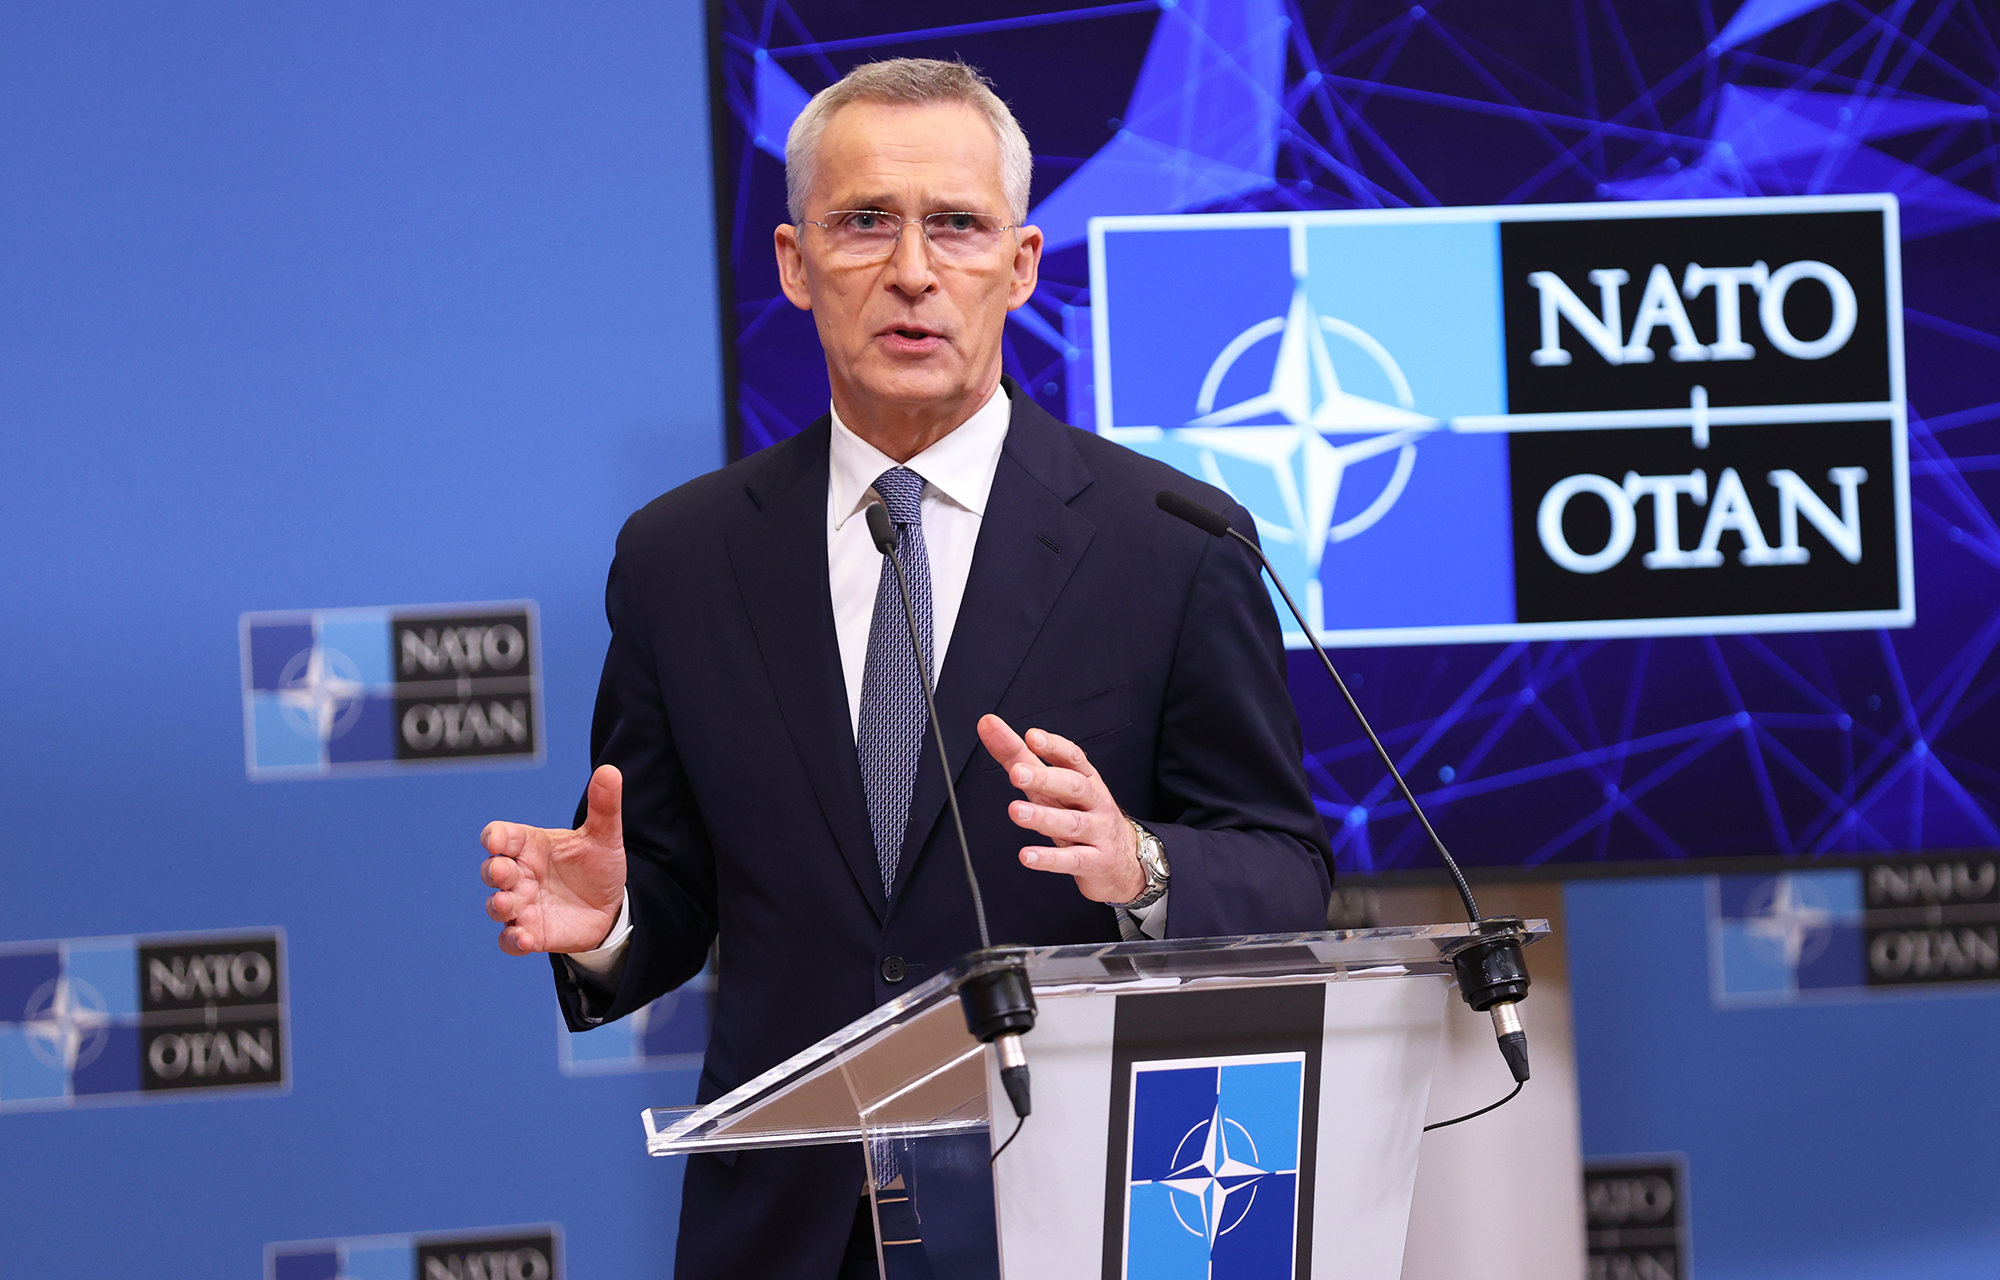 NATO Secretary General Jens Stoltenberg holds a press conference prior to the meeting of NATO Ministers of Foreign Affairs in Brussels, Belgium, on April 3.